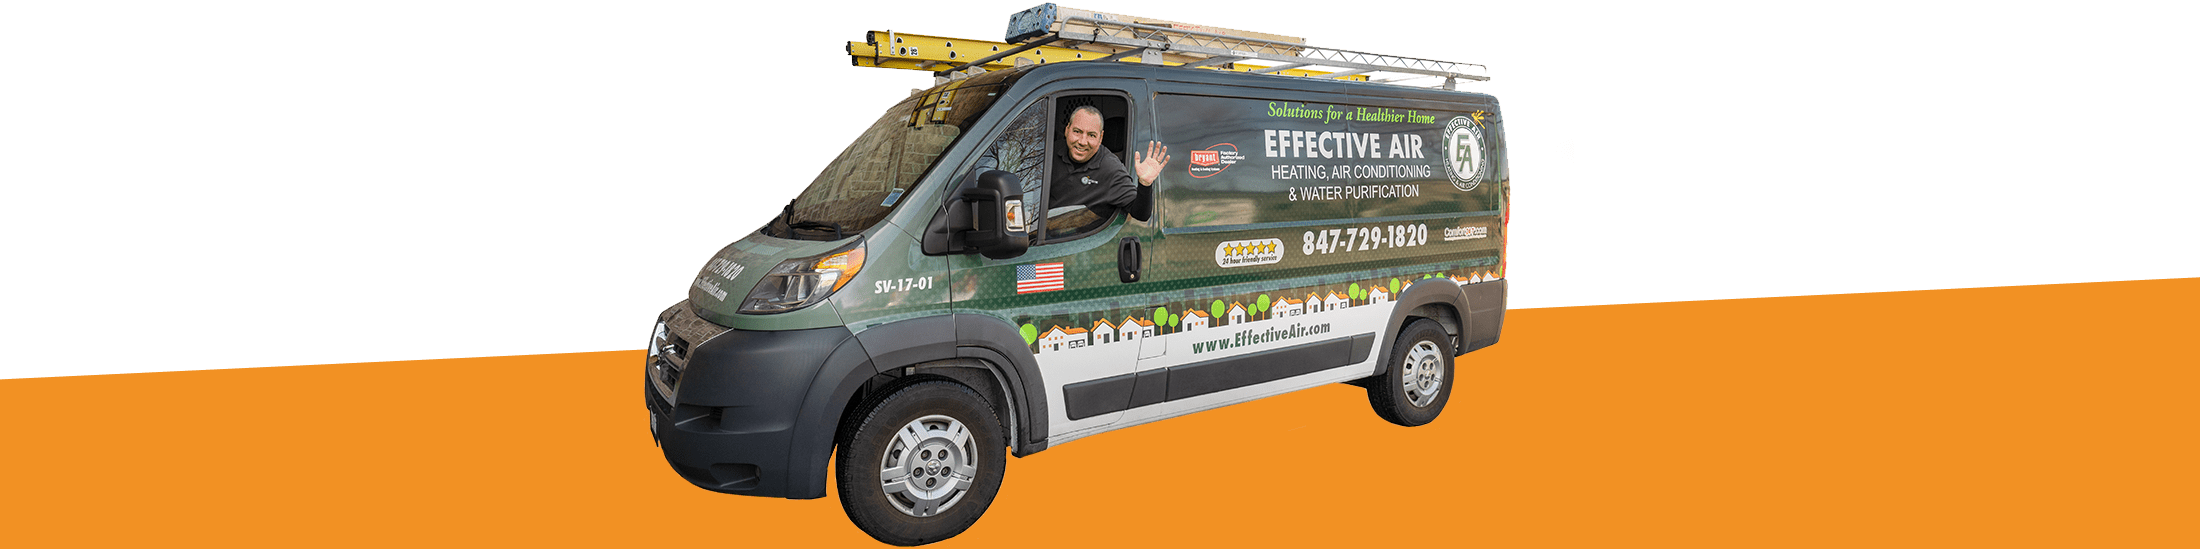 Trust our techs to service your Ductless in Wilmette IL